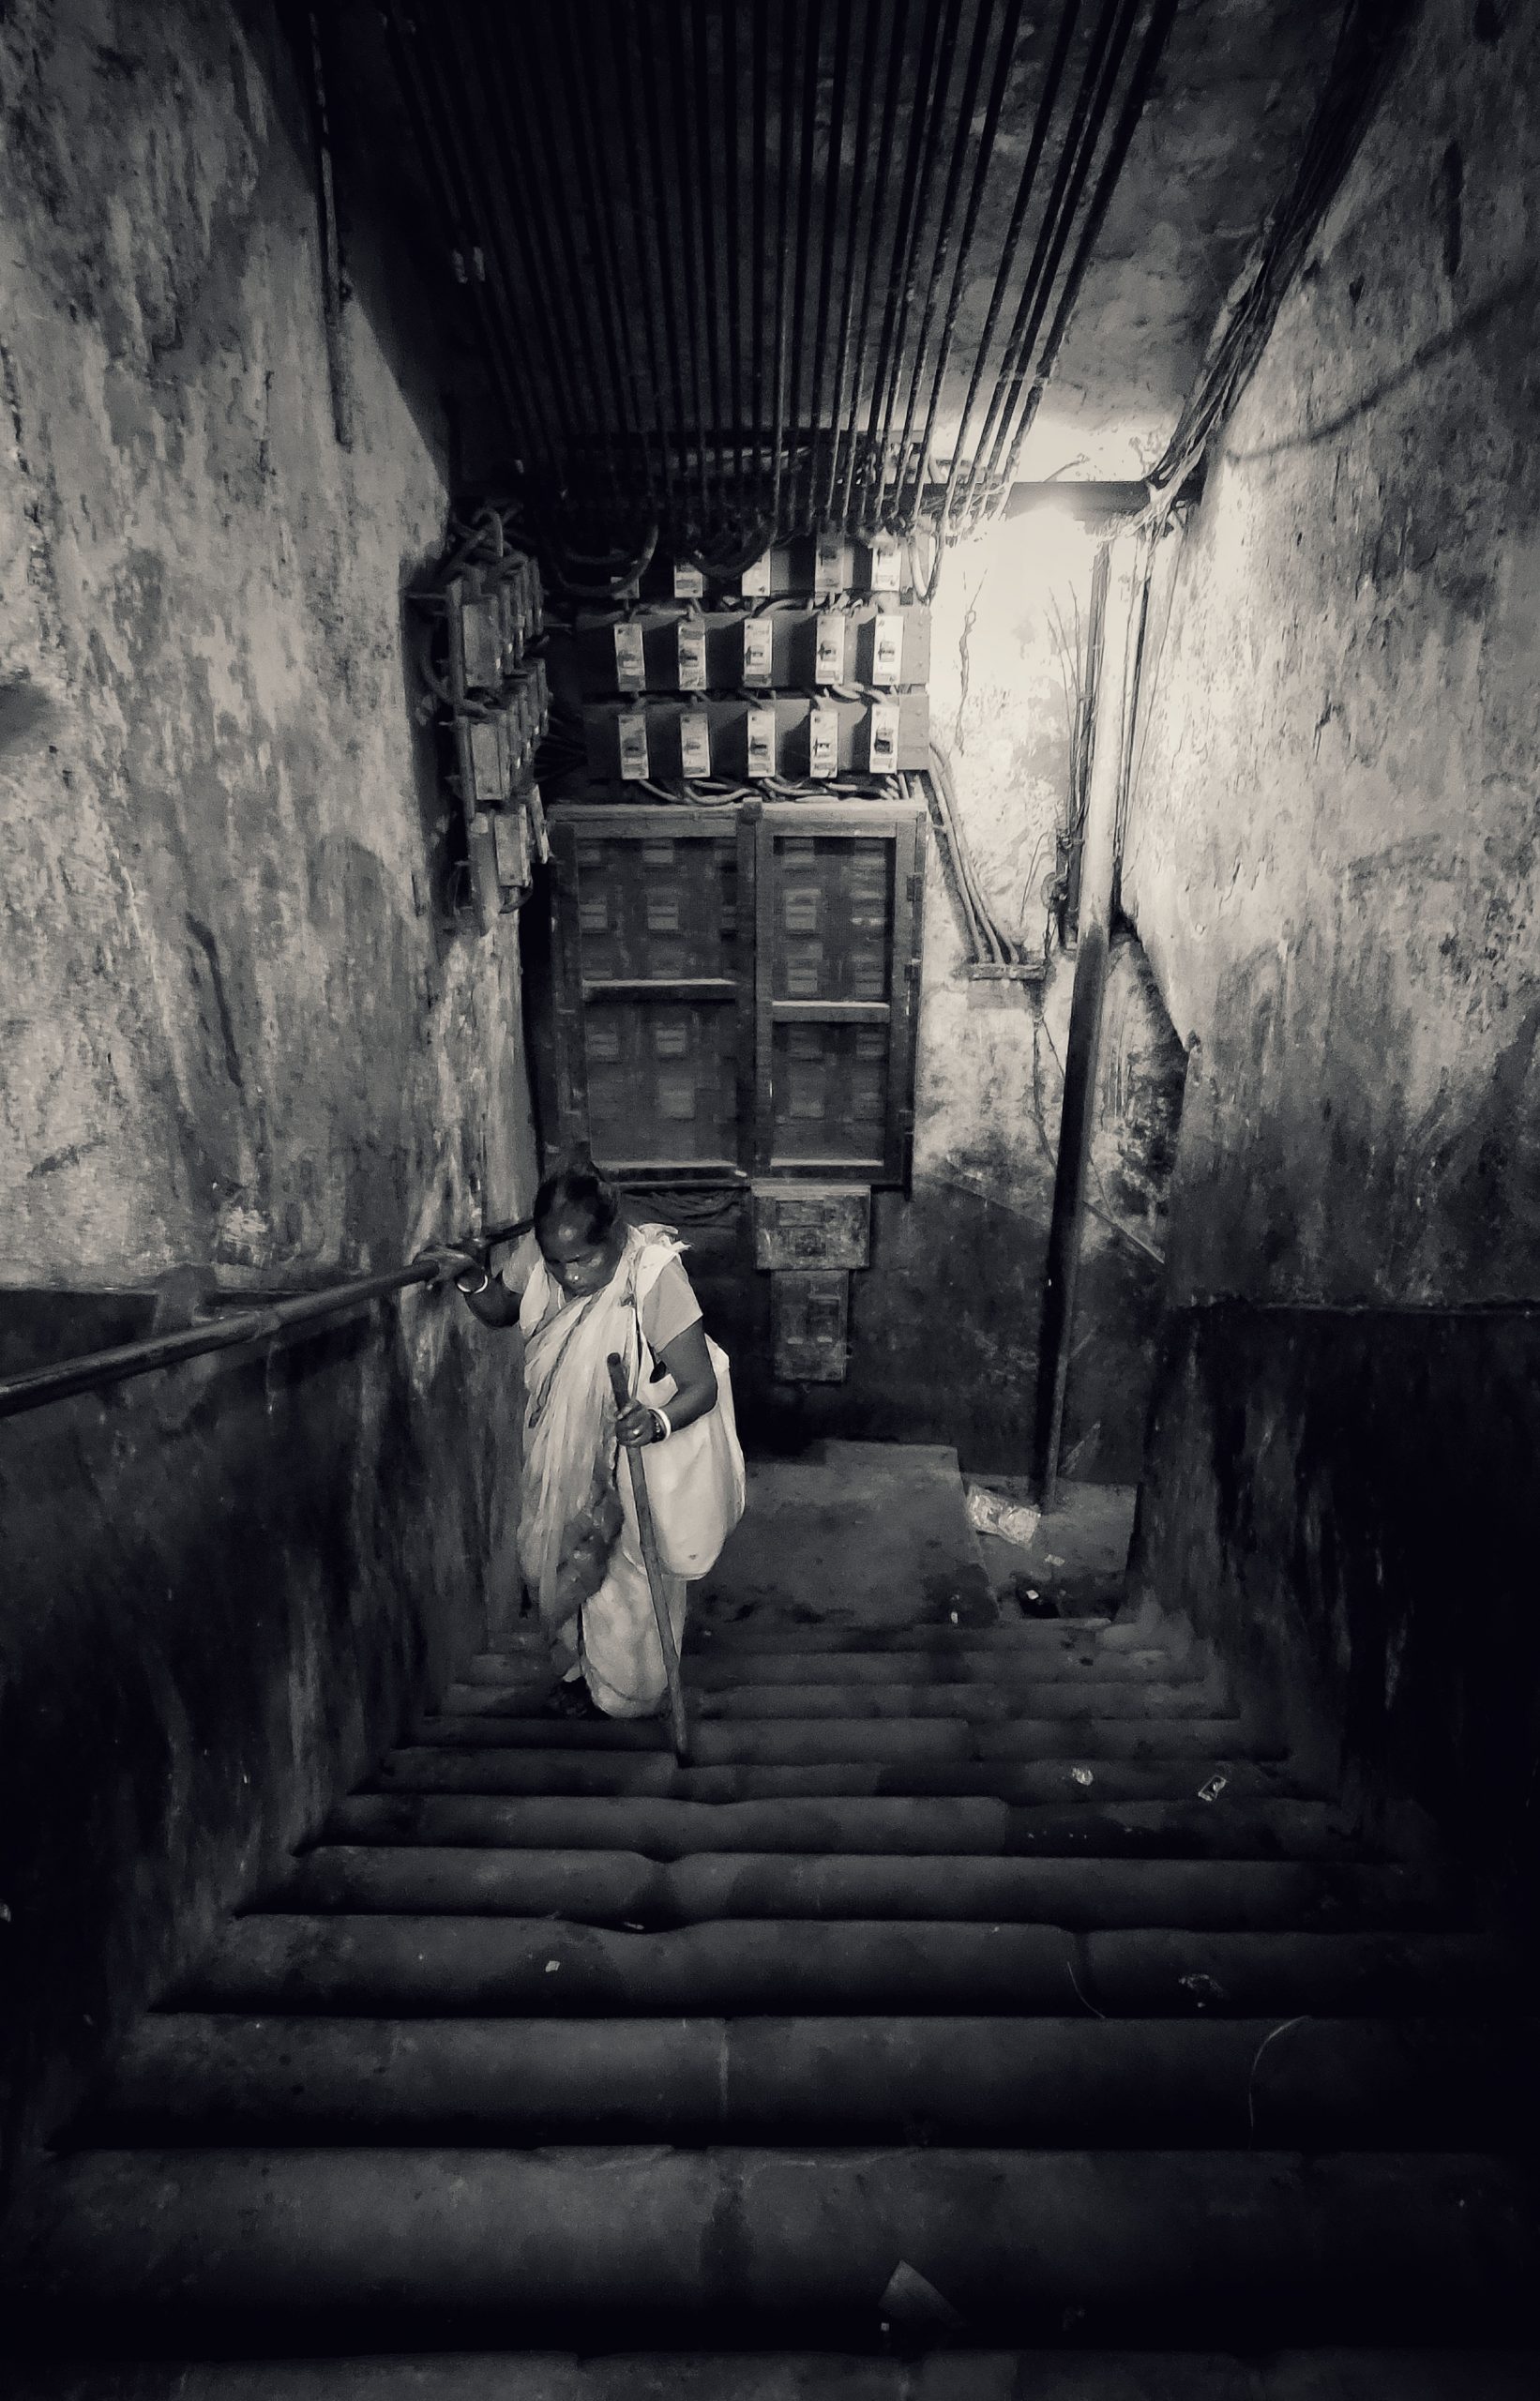 An old woman climbing stairs